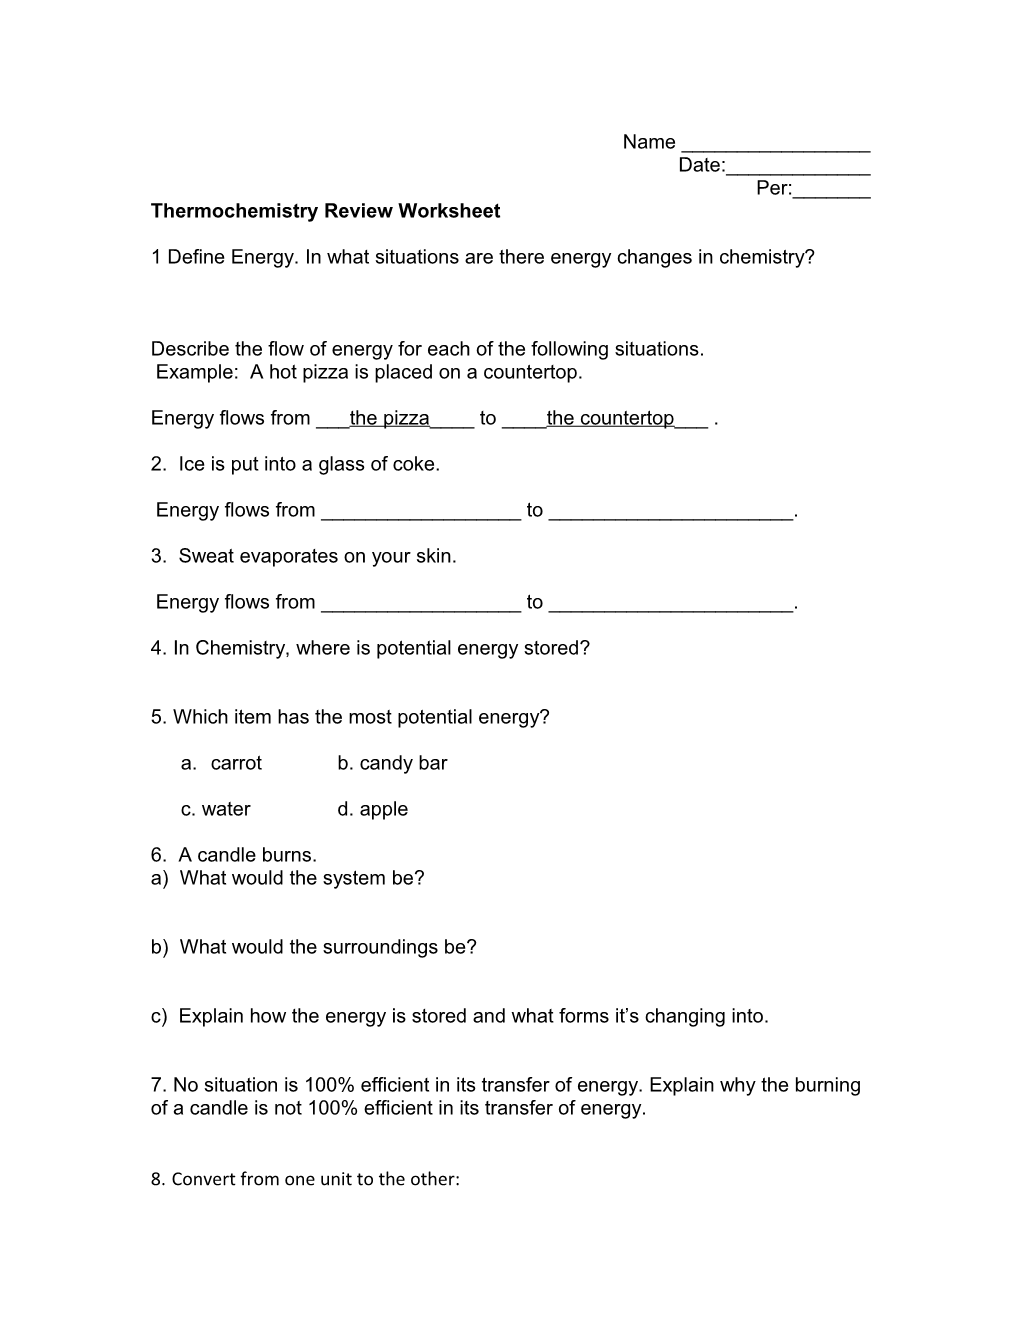 Thermochemistry Review Worksheet s1